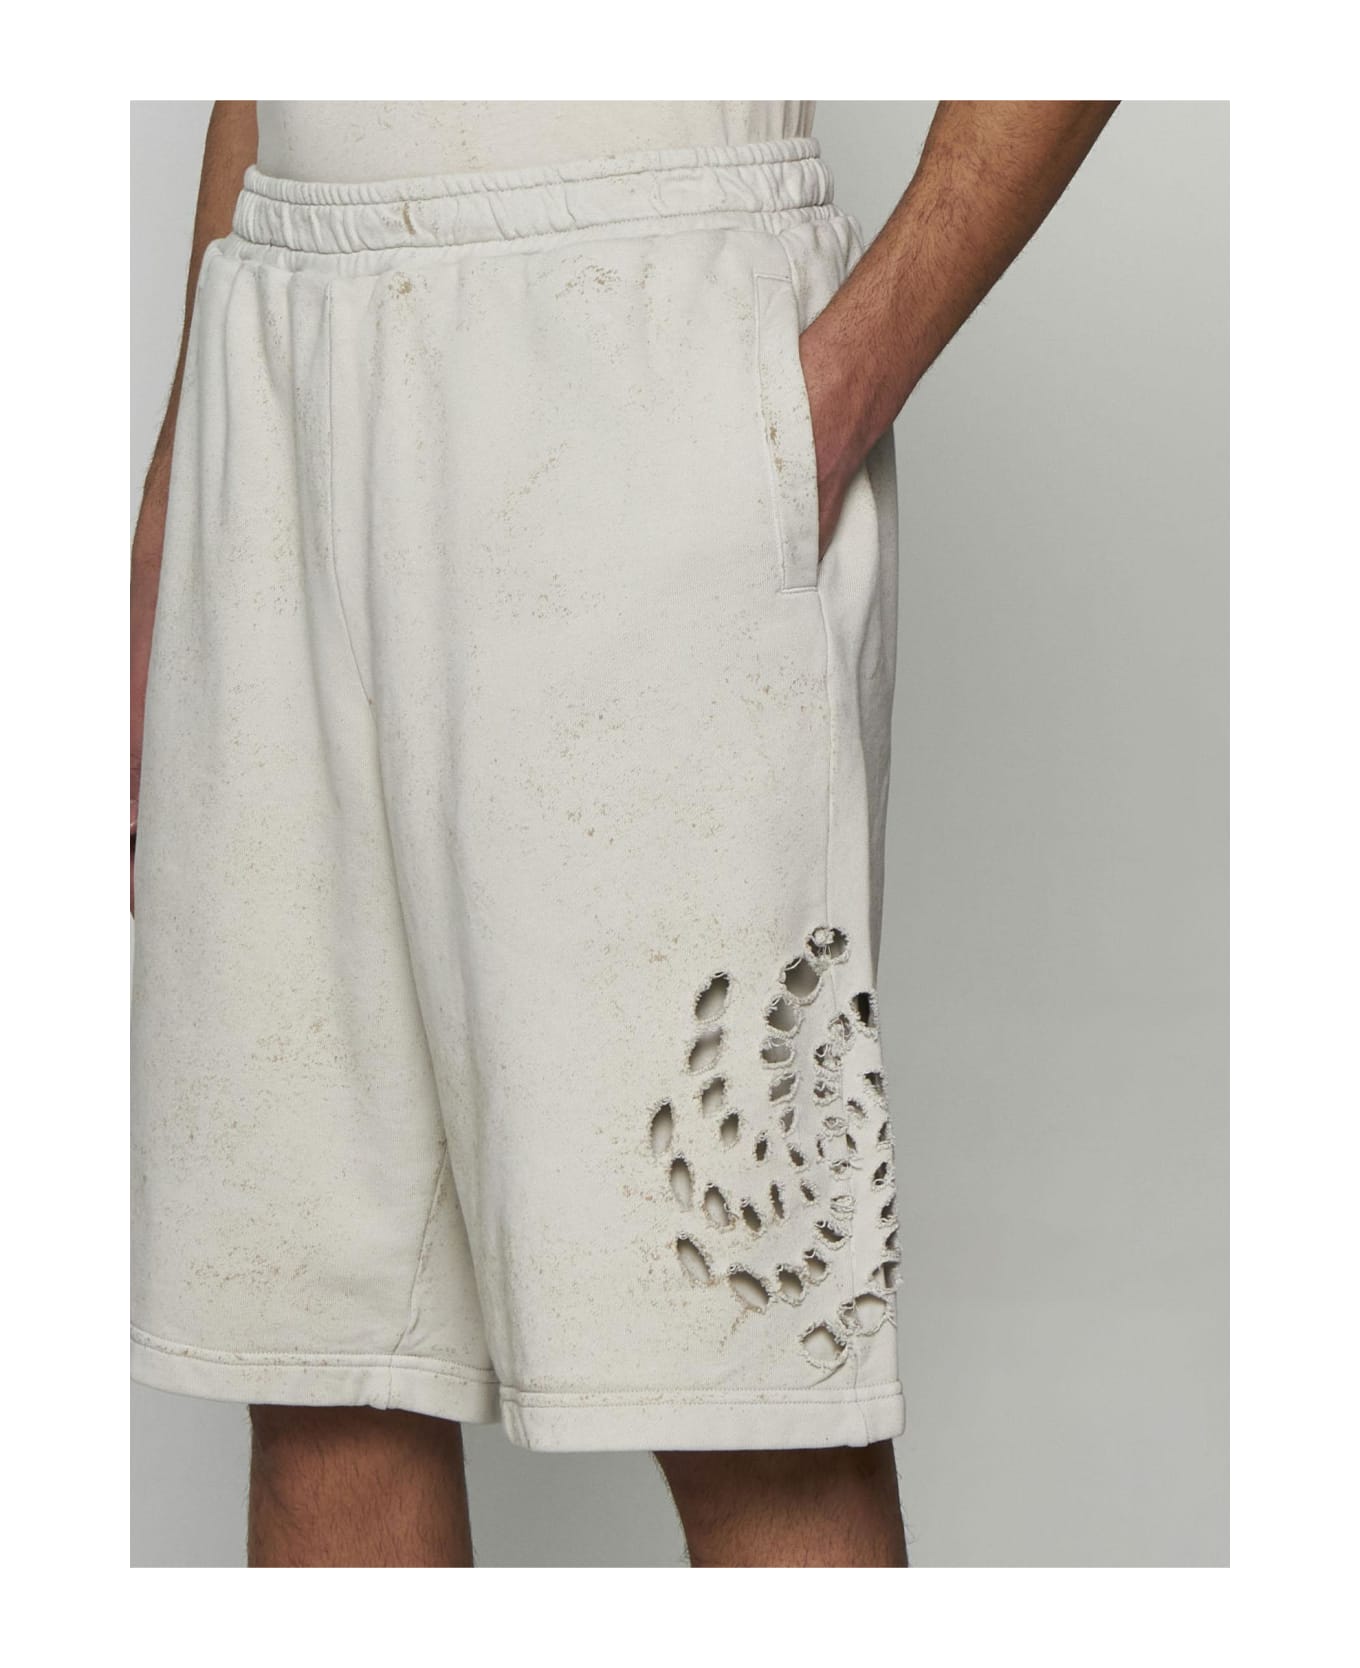 44 Label Group Holes Cotton Shorts - Dirty white+gyps